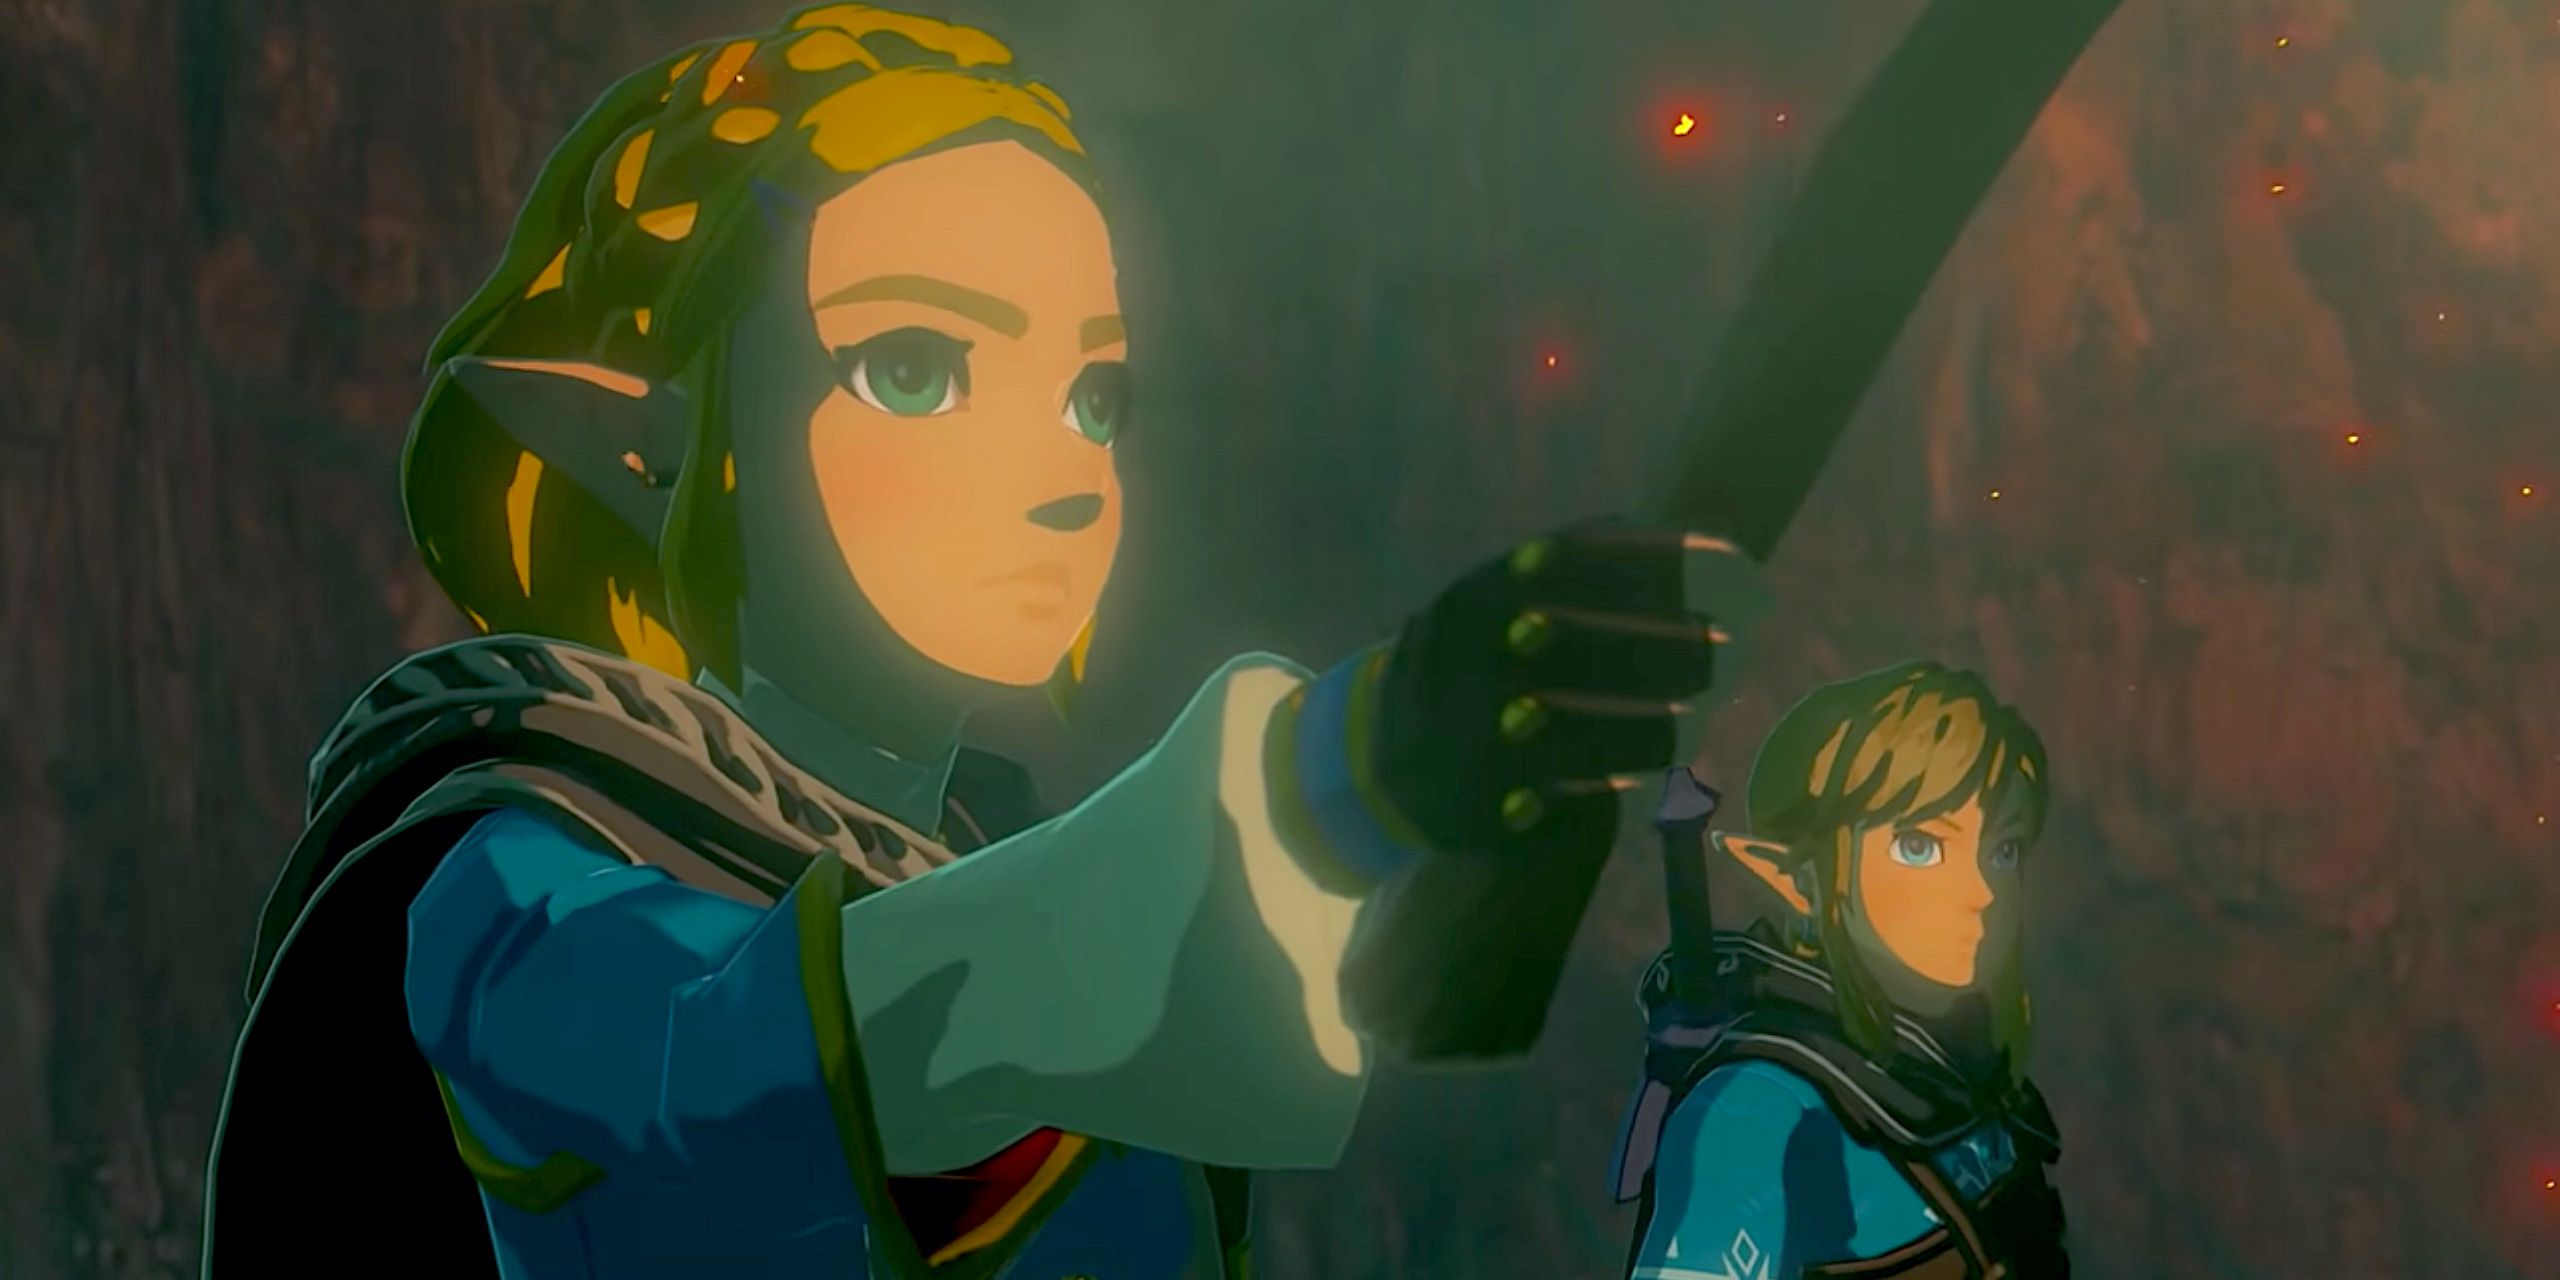 Zelda, wearing practical light blue traveling clothes and with her hair in a crown braid, holding up a torch.